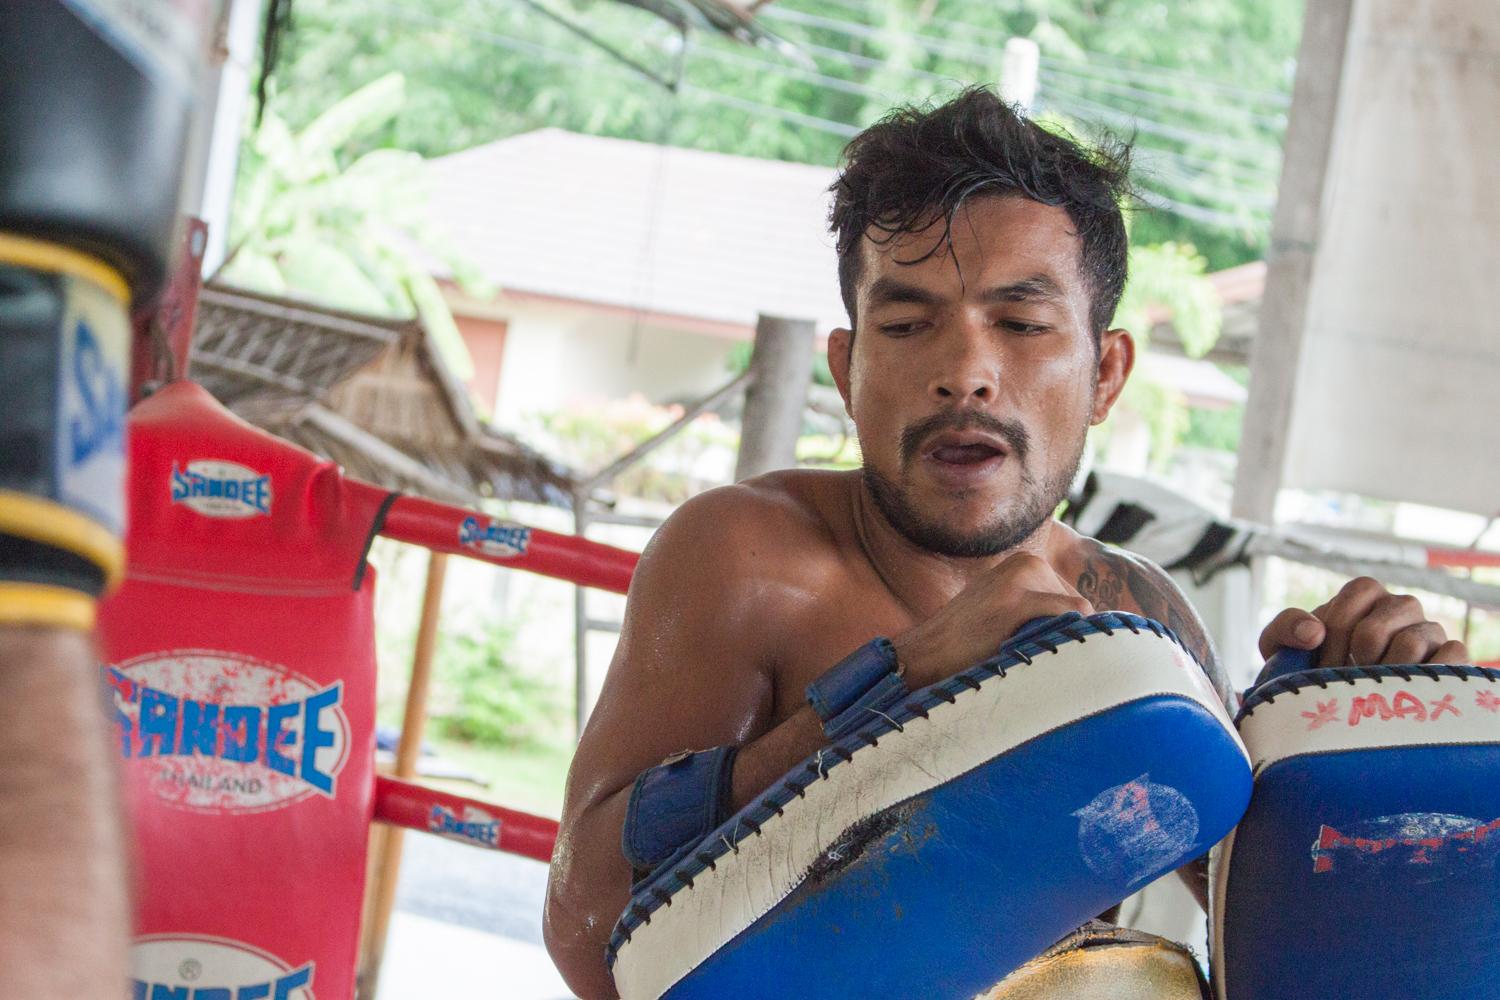 Muay Thai is the national sport in Thailand